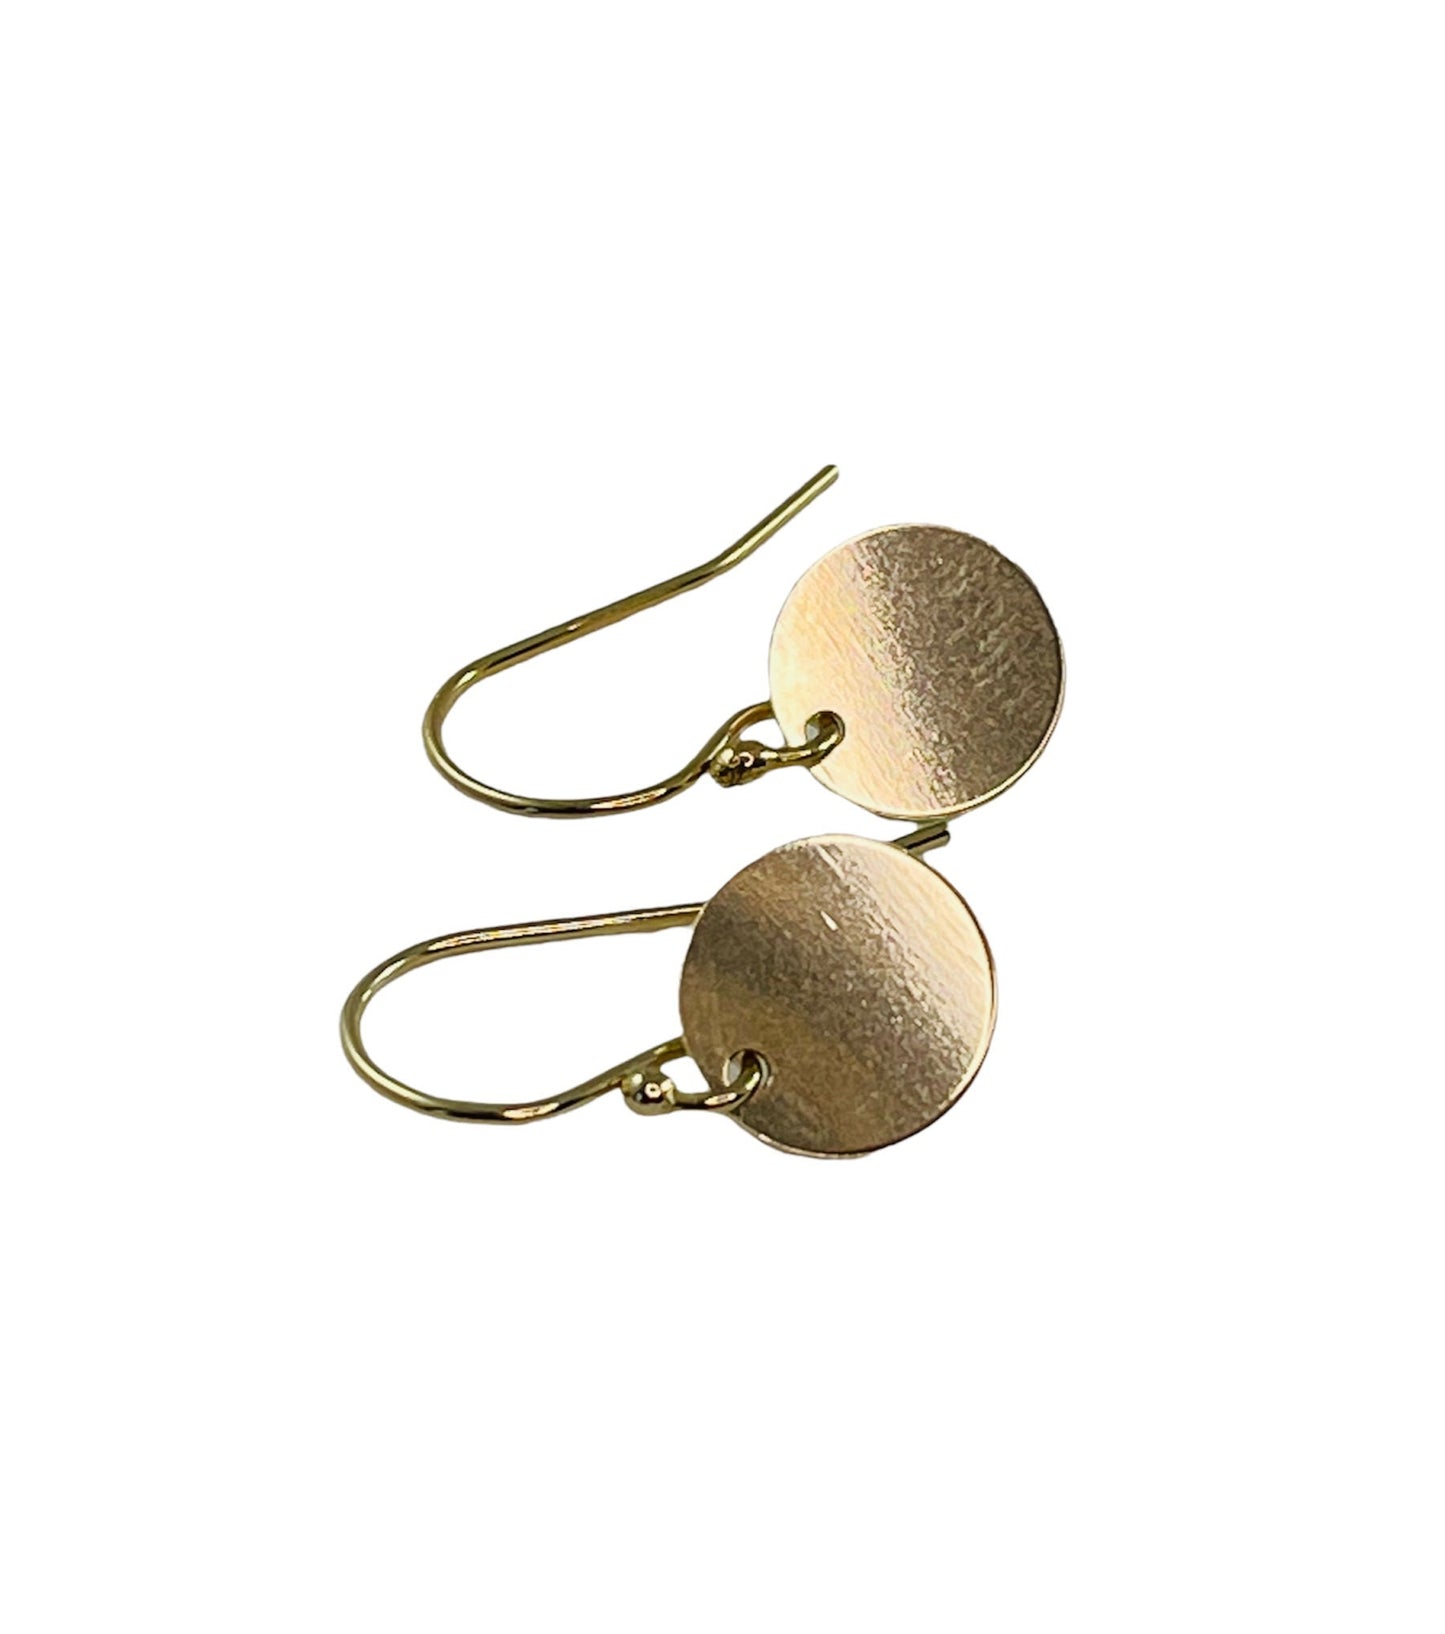 Tiny Gold Sequin Disc Earrings,Golden Disc Earrings,Small Gold Circle Earrings,Minimalist Gold Earrings,14k Gold Filled Disc Dangle Earrings